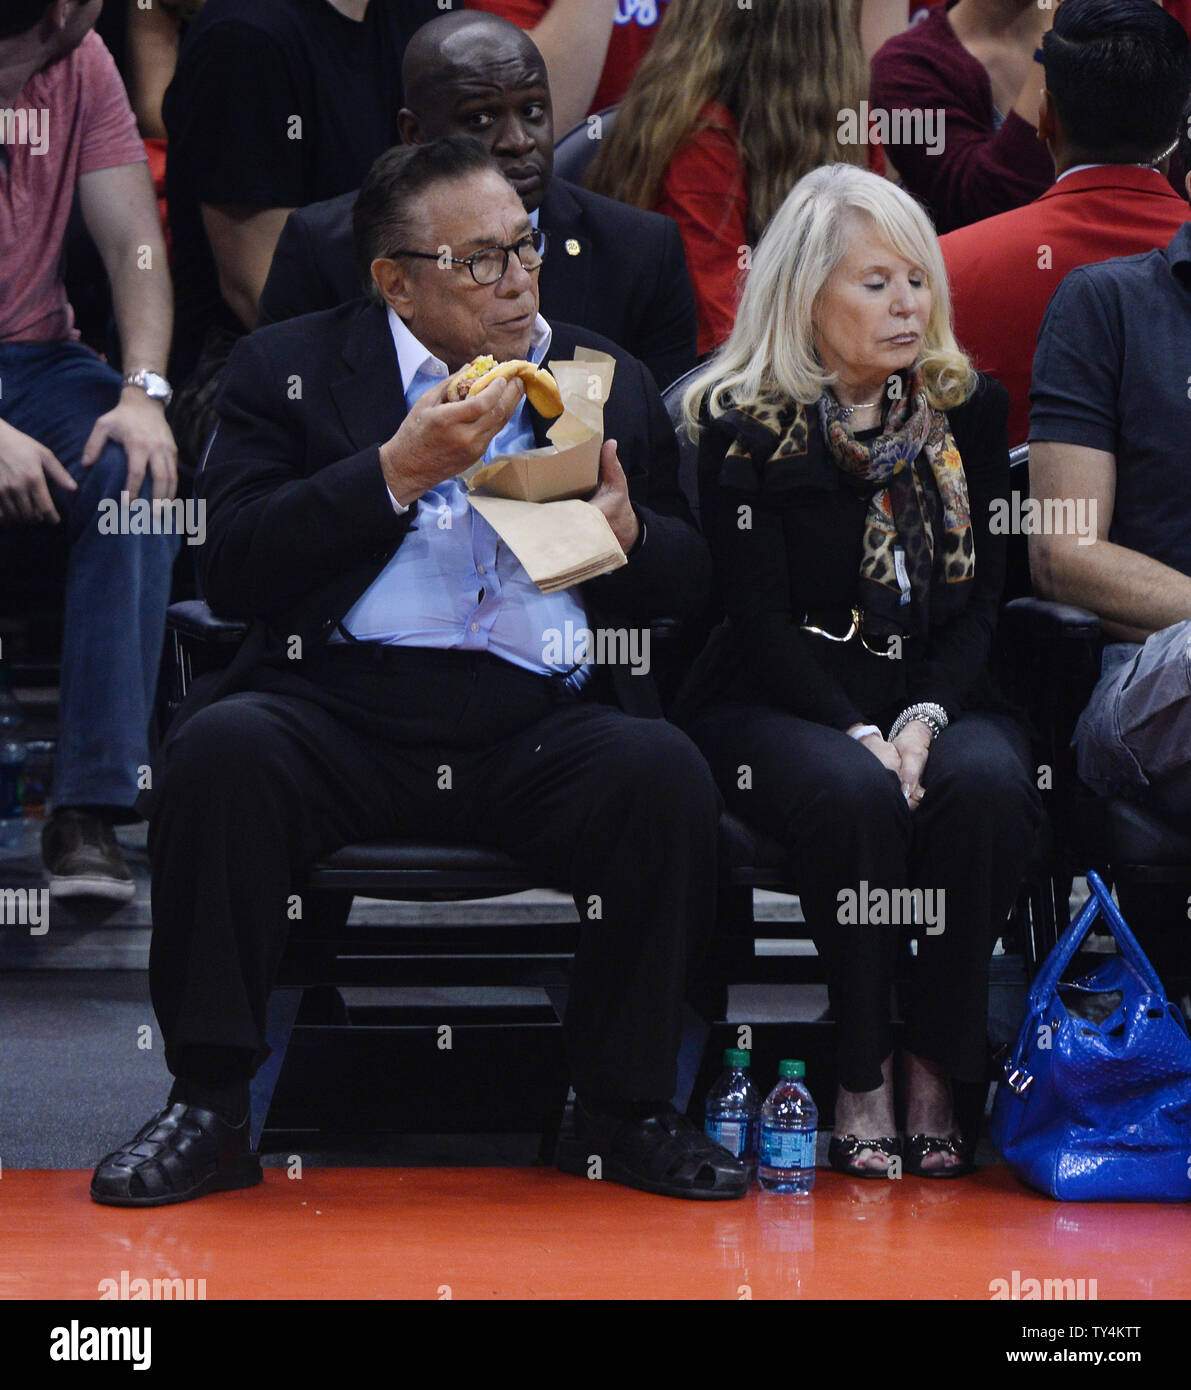 Los Angeles Clippers Owner Donald Sterling Sits Court Side With His Wife Rochelle Sterling At Game 1 In The First Round Of The Western Conference Playoff Series Against The Golden State Warriors